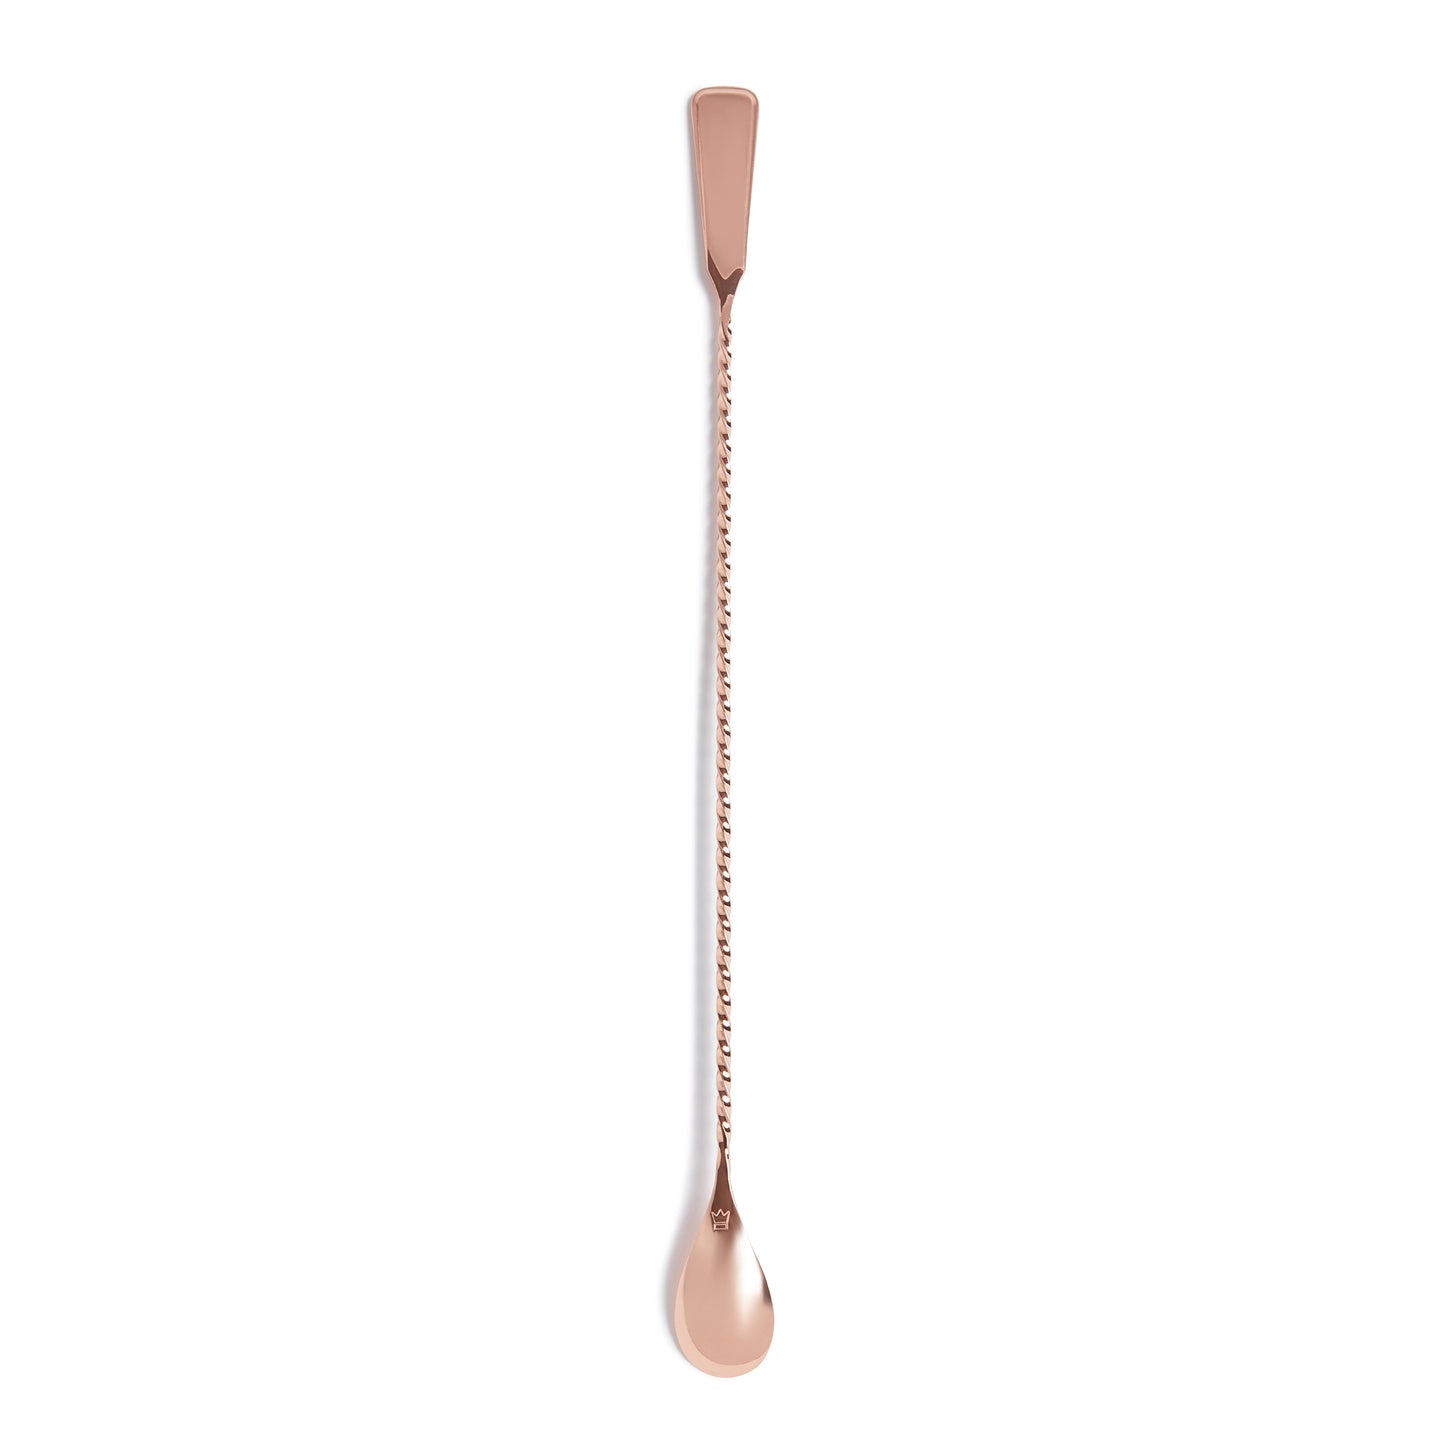 BROMLEY™ BARSPOON / COPPER-PLATED / 36CM